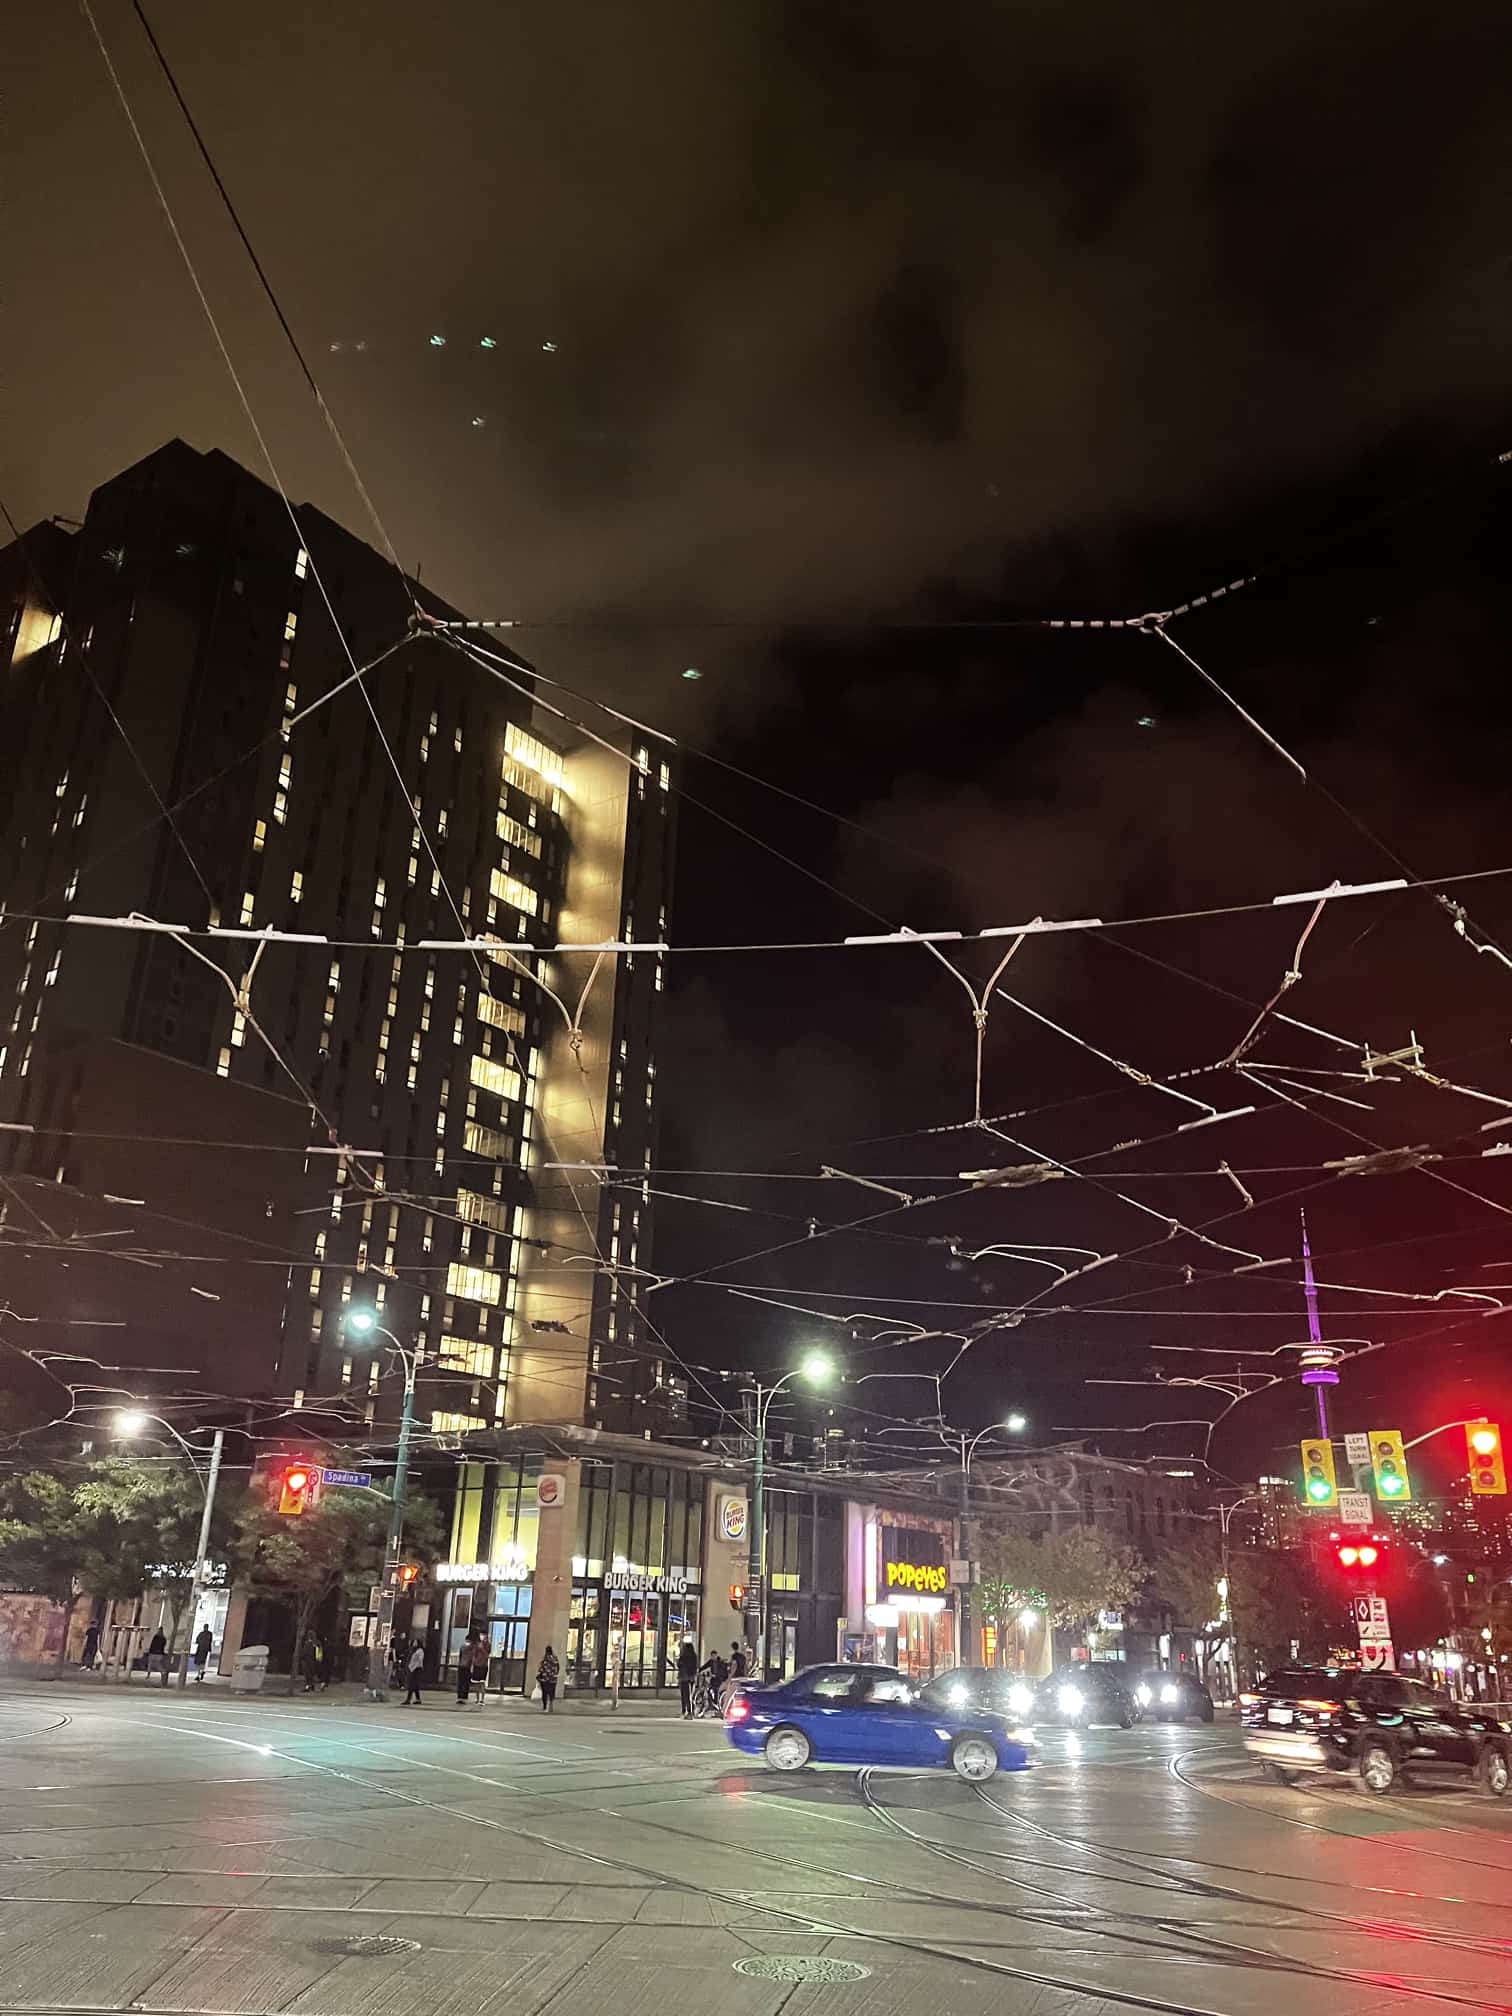 Toronto tram infrastructure.. wires overhead and rails on the ground